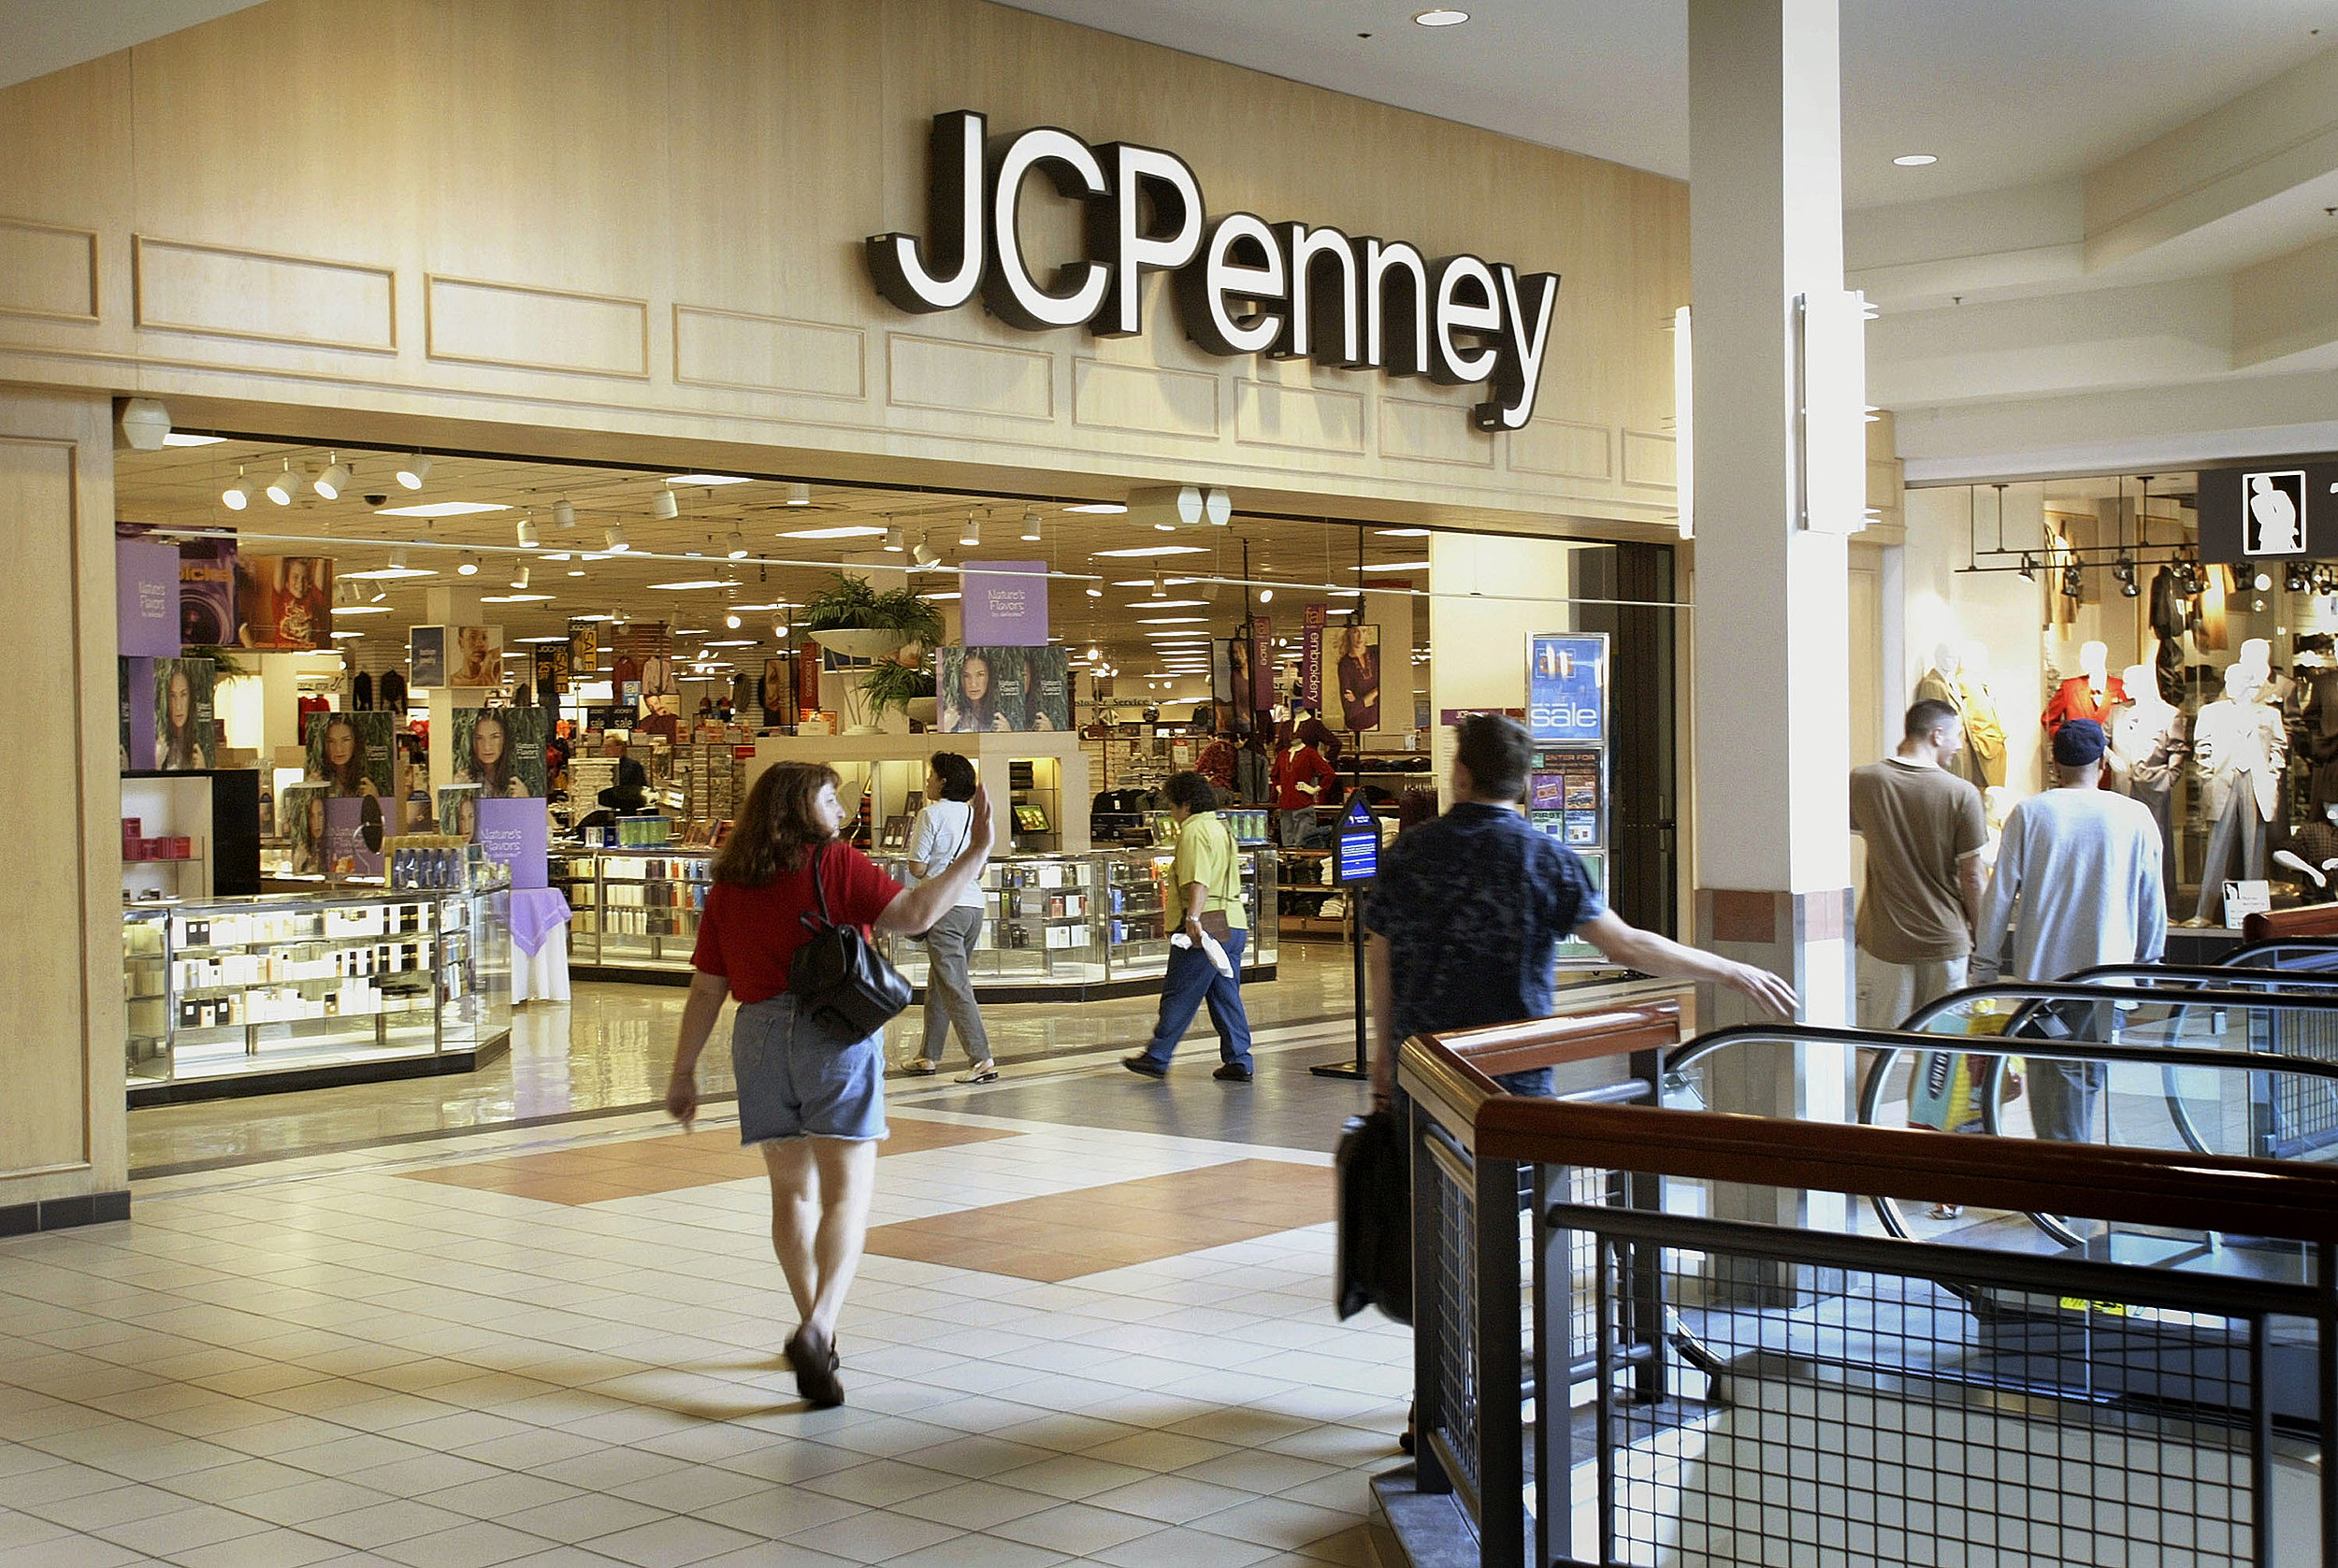 JCPenney Portraits at Quaker Bridge Mall® - A Shopping Center in